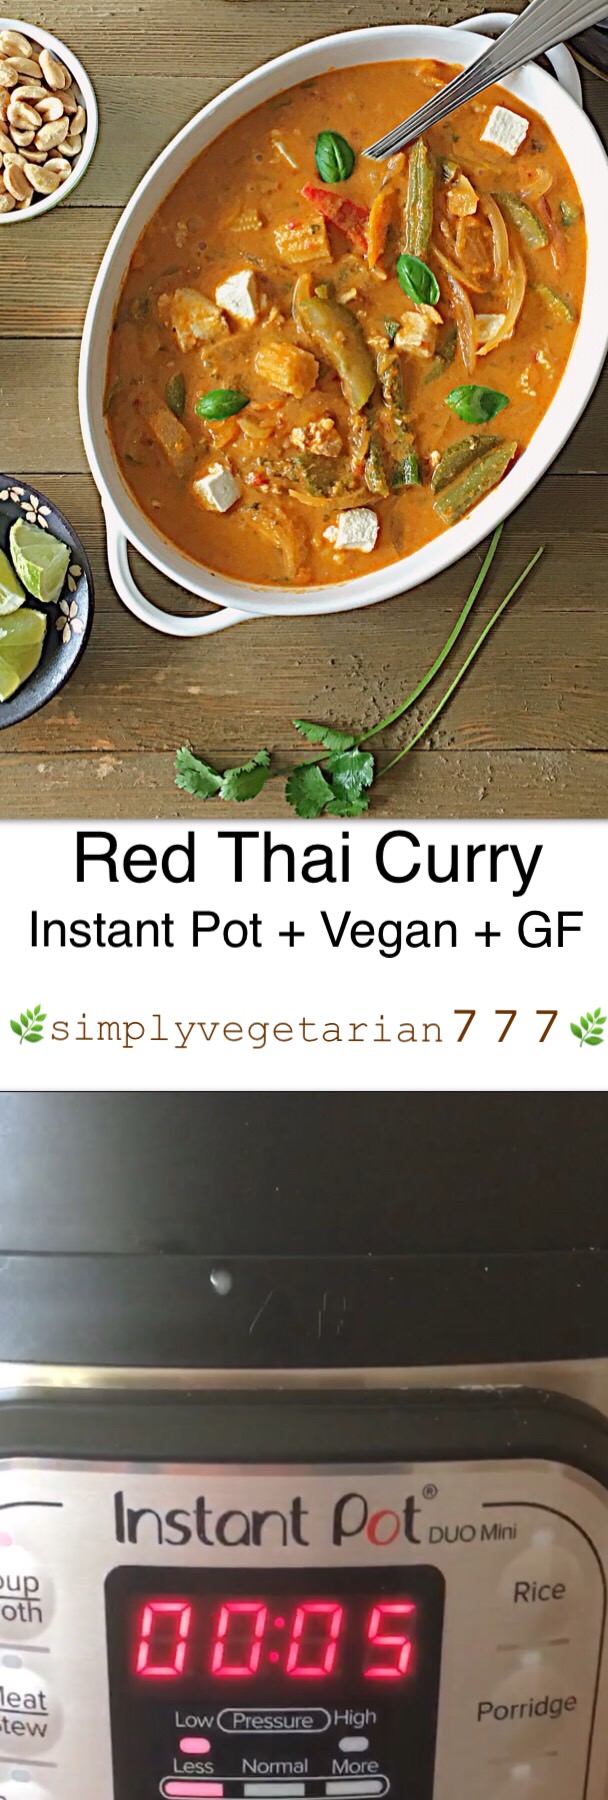 This Instant Pot Red Thai Curry Recipe is a delicious treat from Thai Cuisine. The curry is Easy and Simple to make and has Tofu & Mix Vegetables in it. Thai Curry tastes best when served warm with some Rice on the side. It is Vegan, Glutenfree and has no added oil to it. Find some hidden Tips to personalize it. #instantpotveganrecipes #instantpotasianrecipes #instantpotasianvegan #instantpotthaicurry #instantpotredthaicurry #veganthaicurry #veganredthaicurry #tofu 